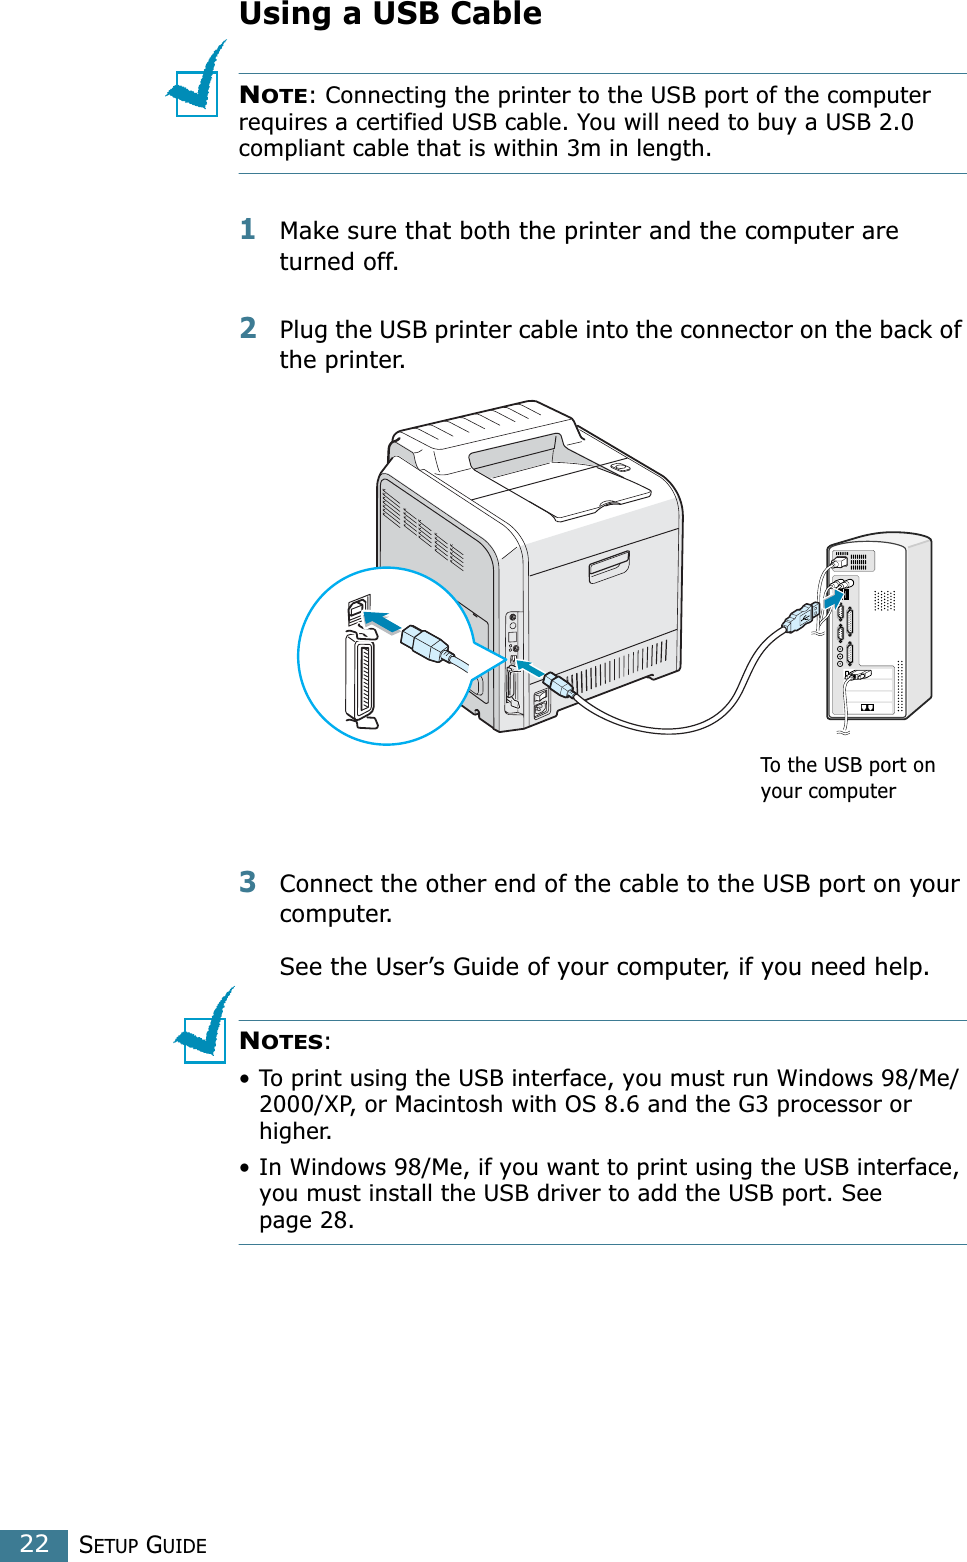 SETUP GUIDE22Using a USB CableNOTE: Connecting the printer to the USB port of the computer requires a certified USB cable. You will need to buy a USB 2.0 compliant cable that is within 3m in length. 1Make sure that both the printer and the computer are turned off.2Plug the USB printer cable into the connector on the back of the printer. 3Connect the other end of the cable to the USB port on your computer. See the User’s Guide of your computer, if you need help.NOTES: • To print using the USB interface, you must run Windows 98/Me/2000/XP, or Macintosh with OS 8.6 and the G3 processor or higher.• In Windows 98/Me, if you want to print using the USB interface, you must install the USB driver to add the USB port. See page 28.To the USB port on your computer